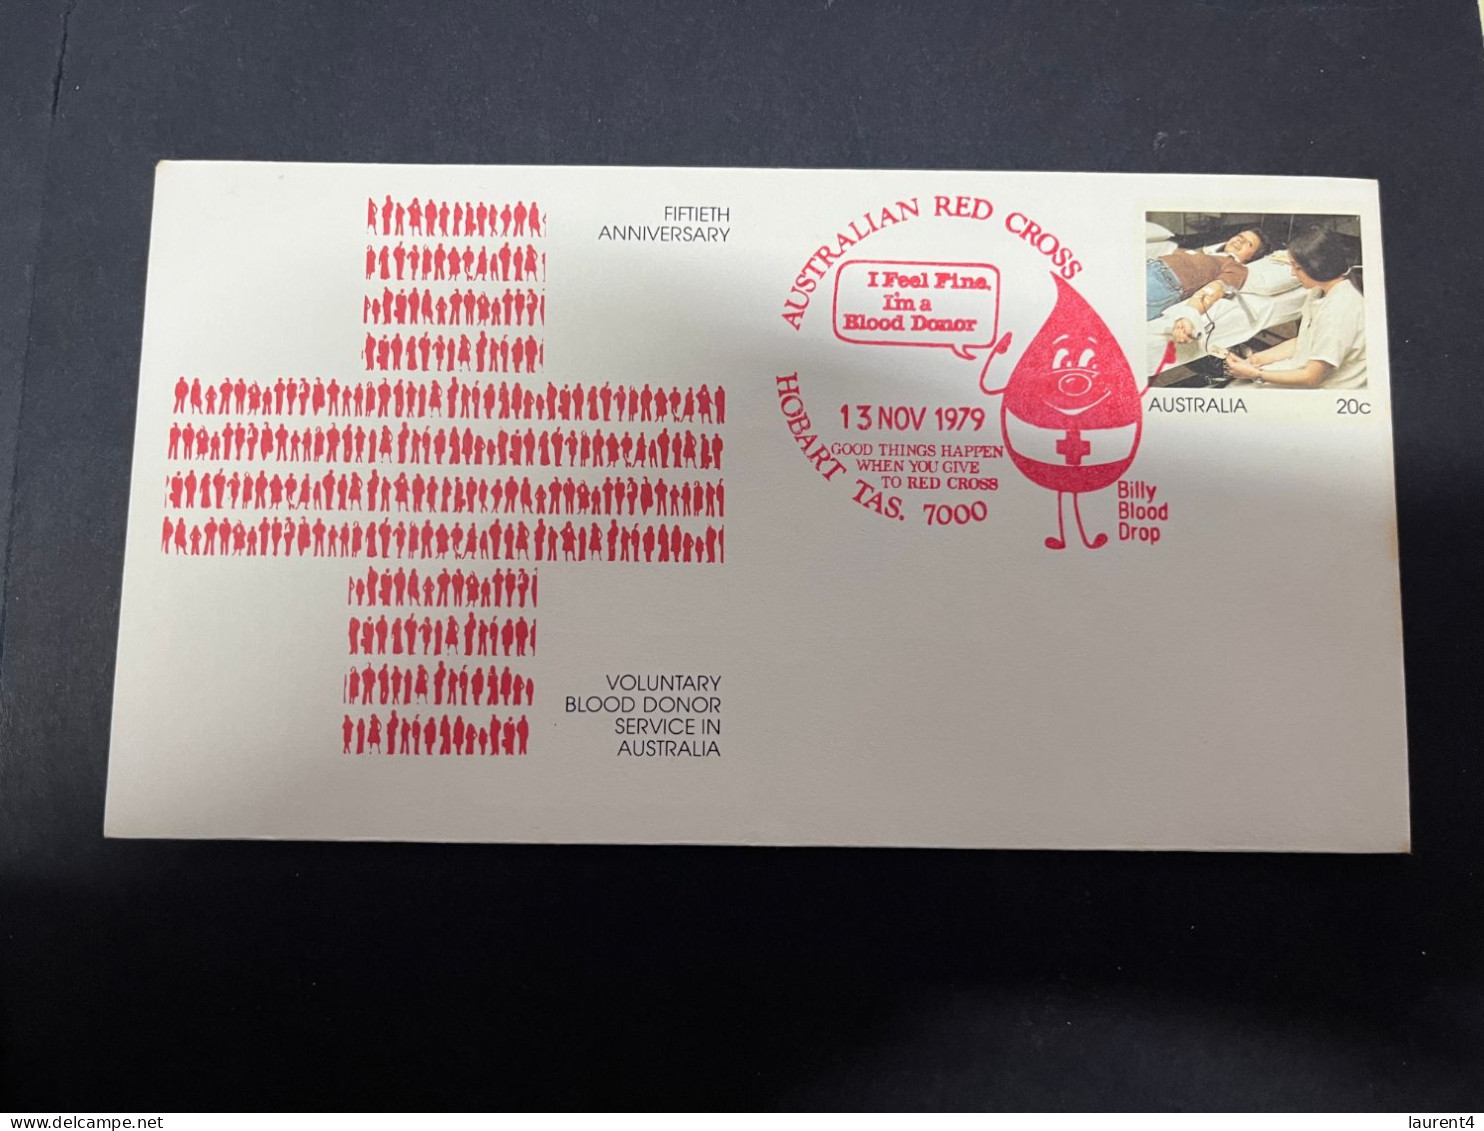 21-4-2024 (2 Z 39) Australia FDC Cover - 1982 - Blood Donors (2 Covers) (Red Cross) - Premiers Jours (FDC)